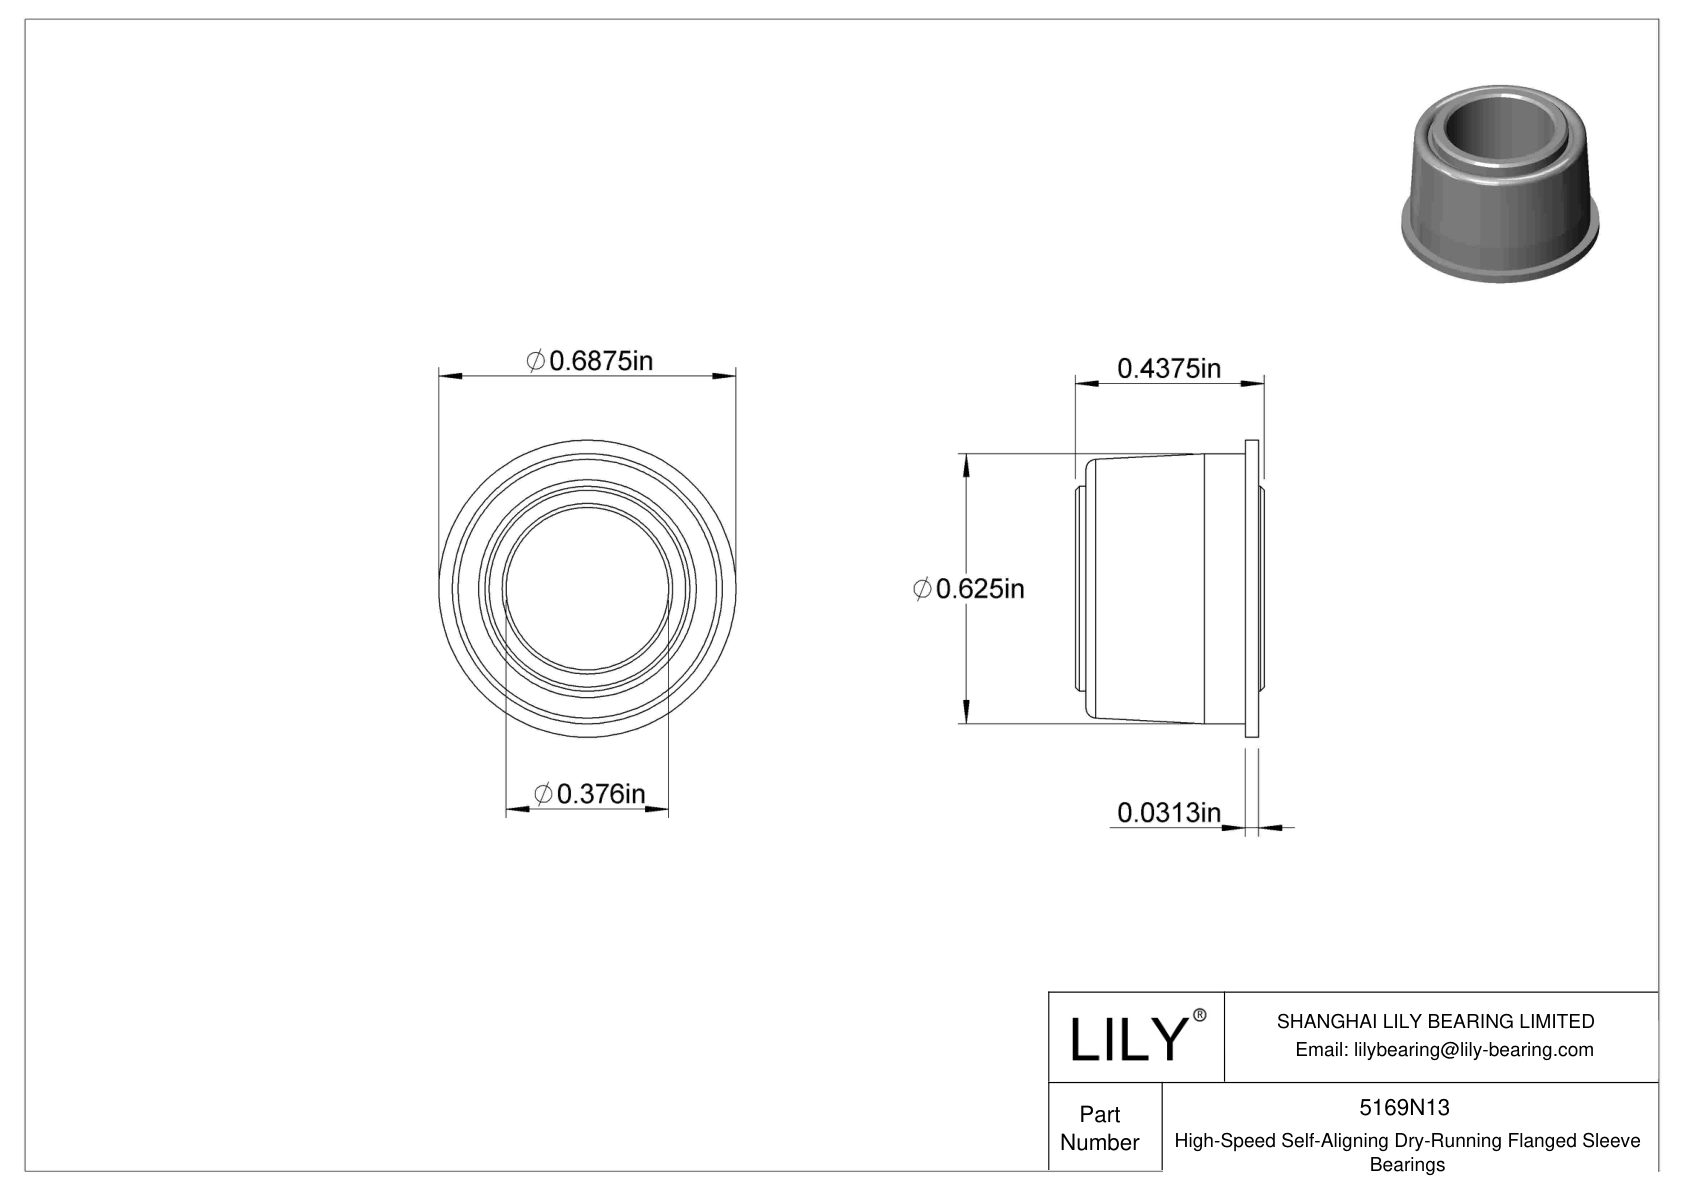 FBGJNBD High-Speed Self-Aligning Dry-Running Flanged Sleeve Bearings cad drawing